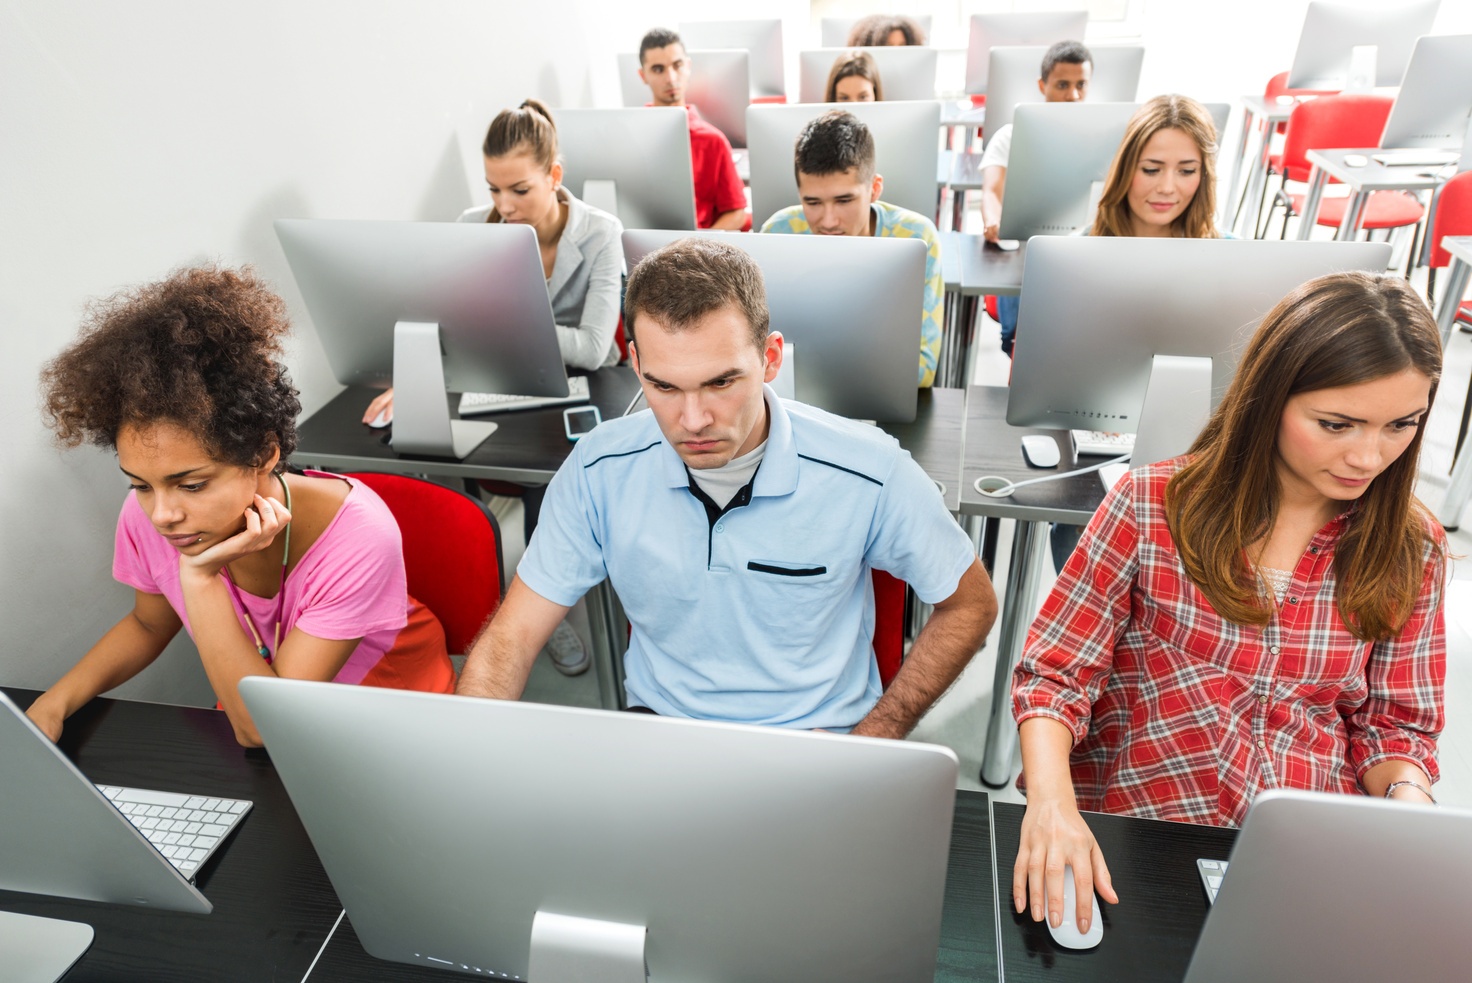 Large group of people using computer in a computer lab.